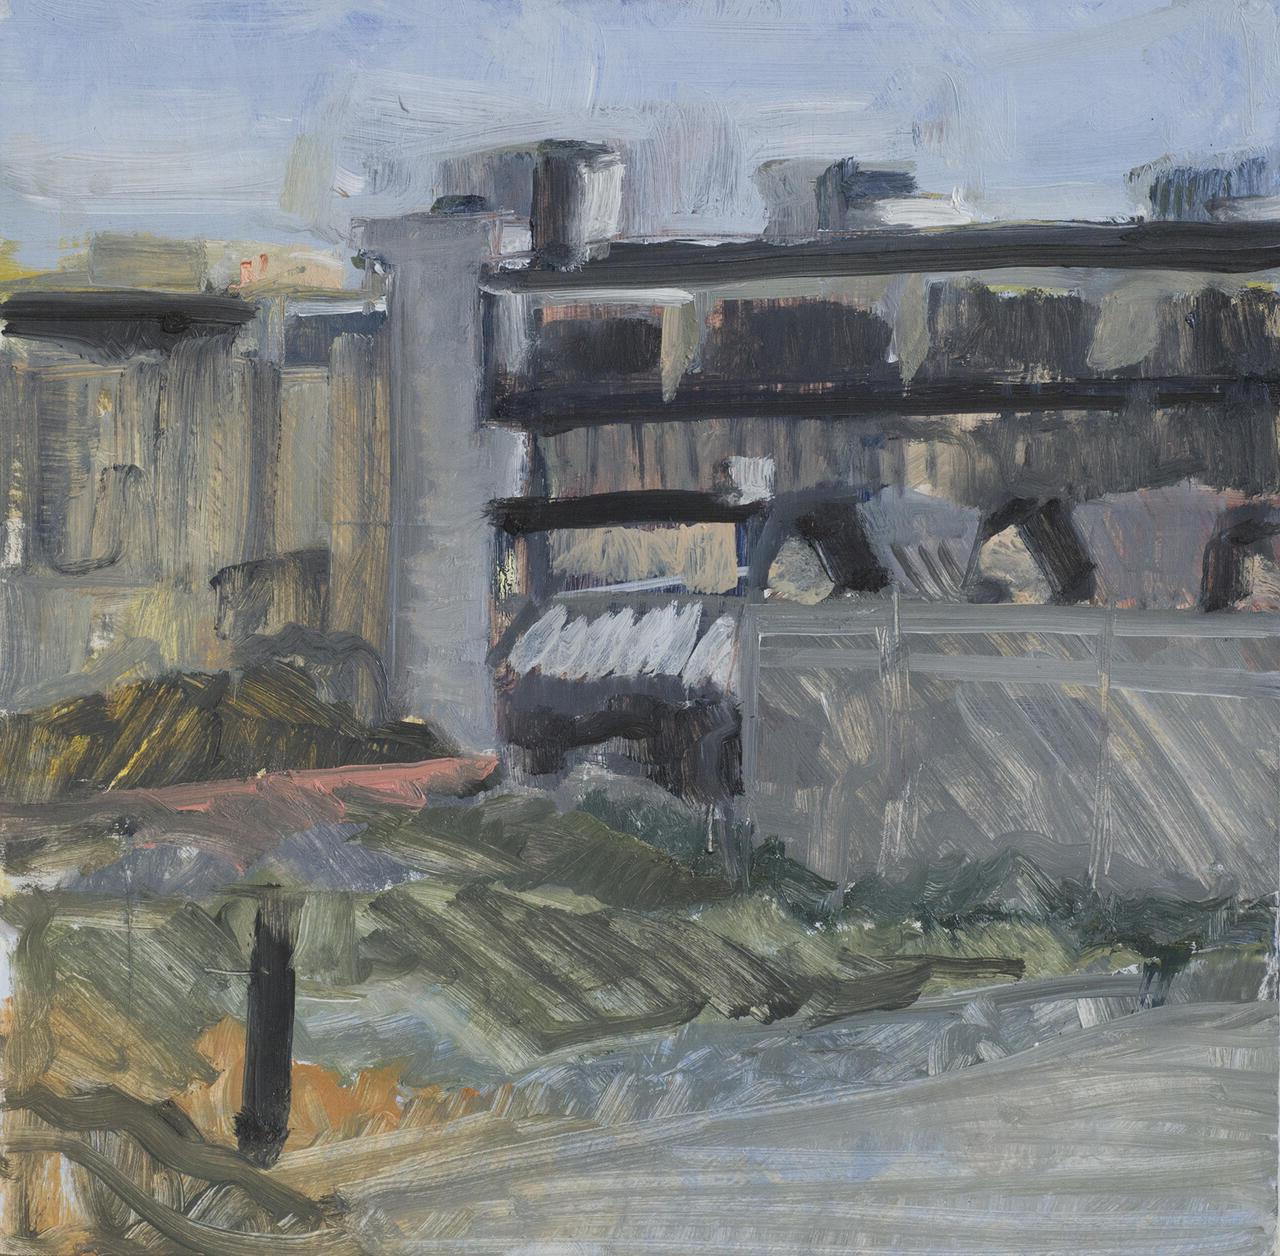 Textural painting of buildings during the daytime.